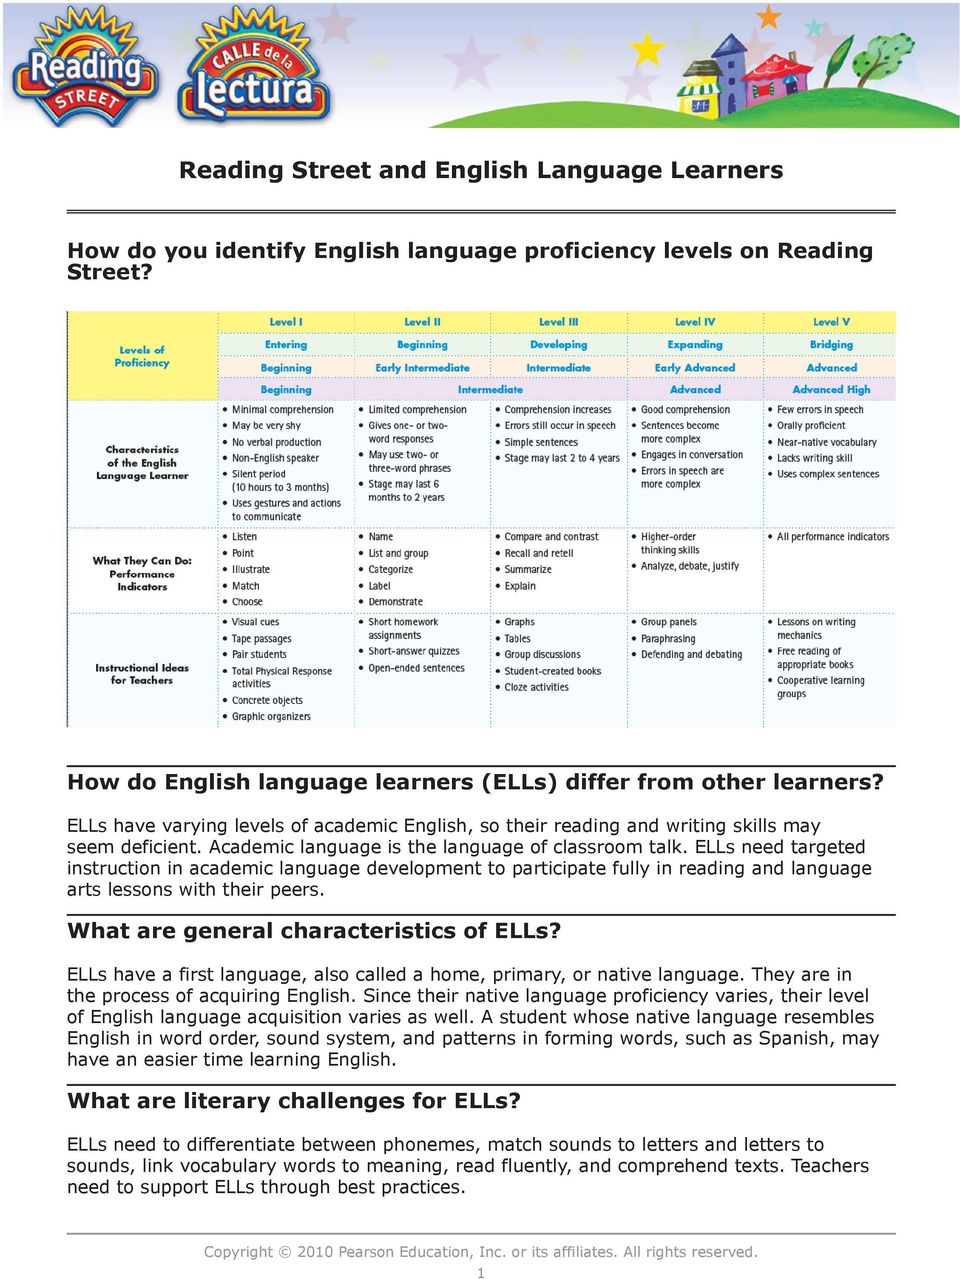 ELLs need targeted instruction in academic language development to participate fully in reading and language arts lessons with their peers. What are general characteristics of ELLs?